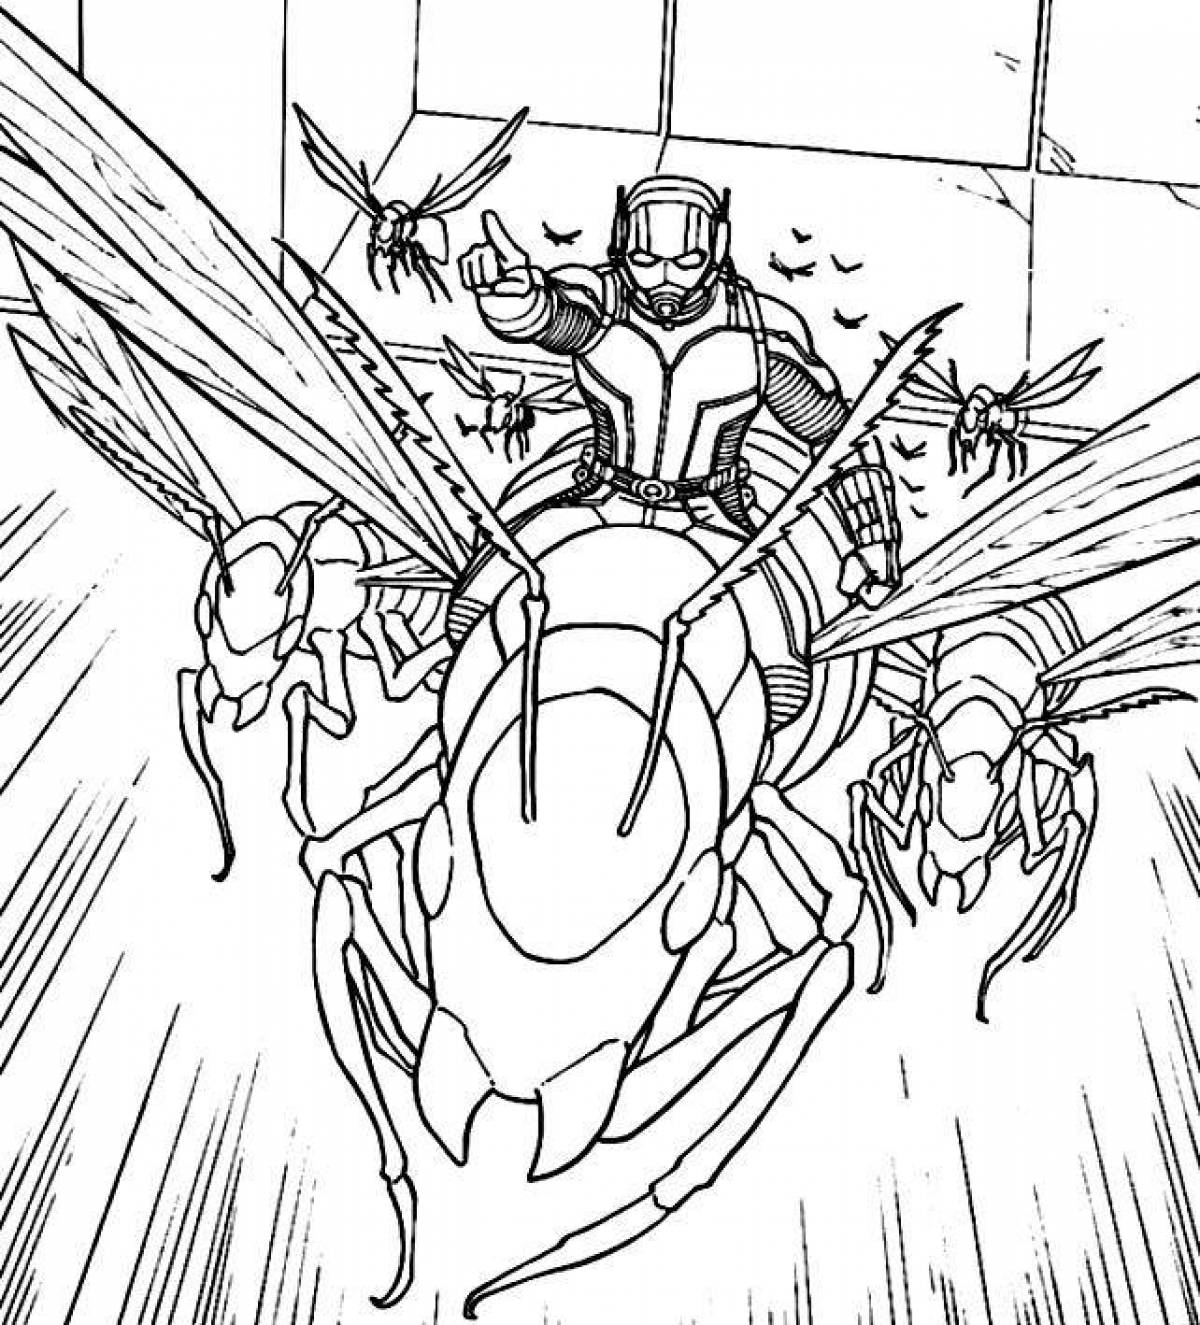 Ant-Man funny coloring book